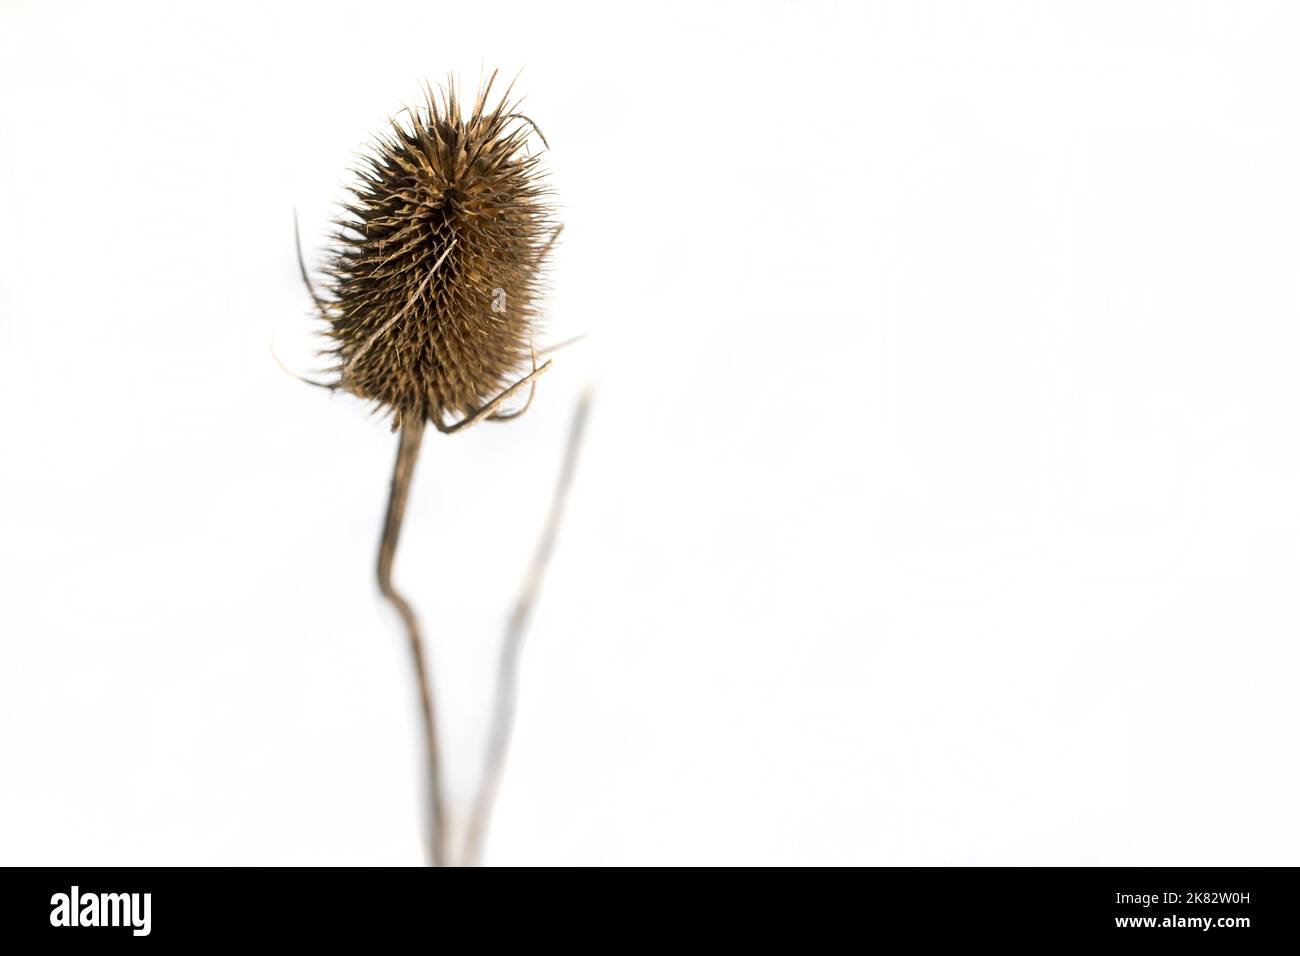 Closeup of a thistle on a white background. Abstract flower. Nature, plant. Stock Photo